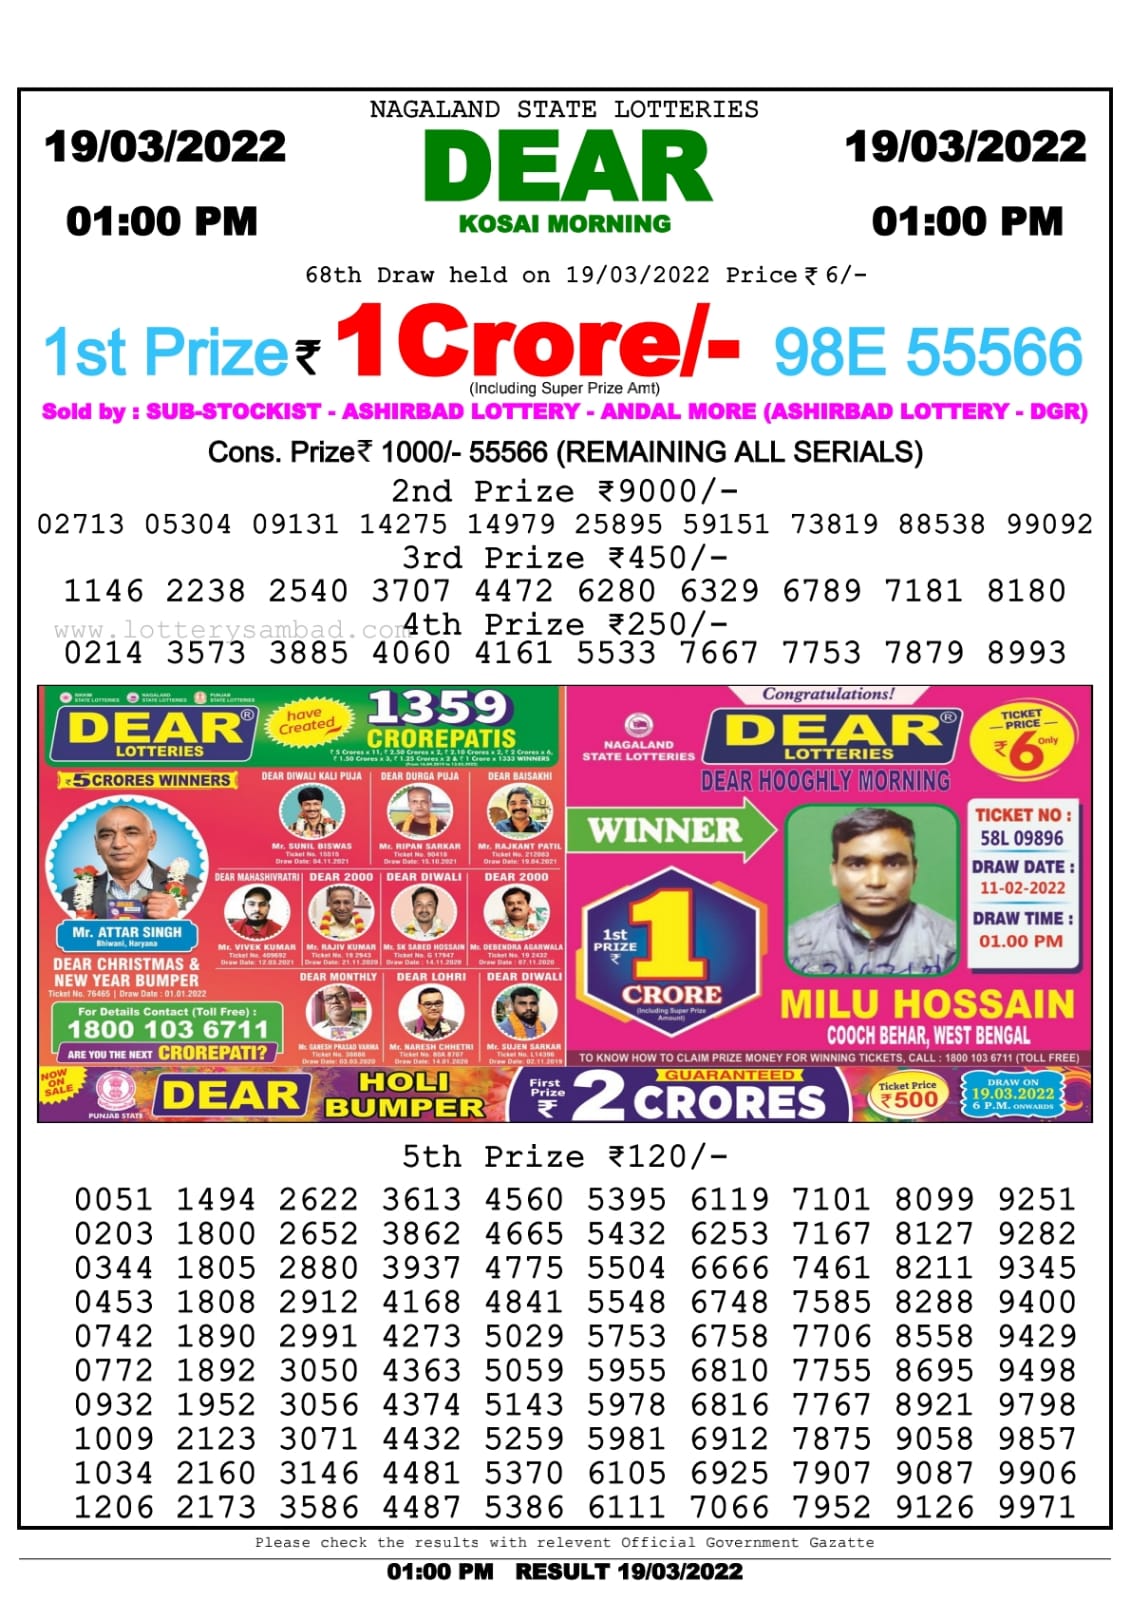 Dear Lottery Nagaland state Lottery Results 01.00 pm 19.03.2022